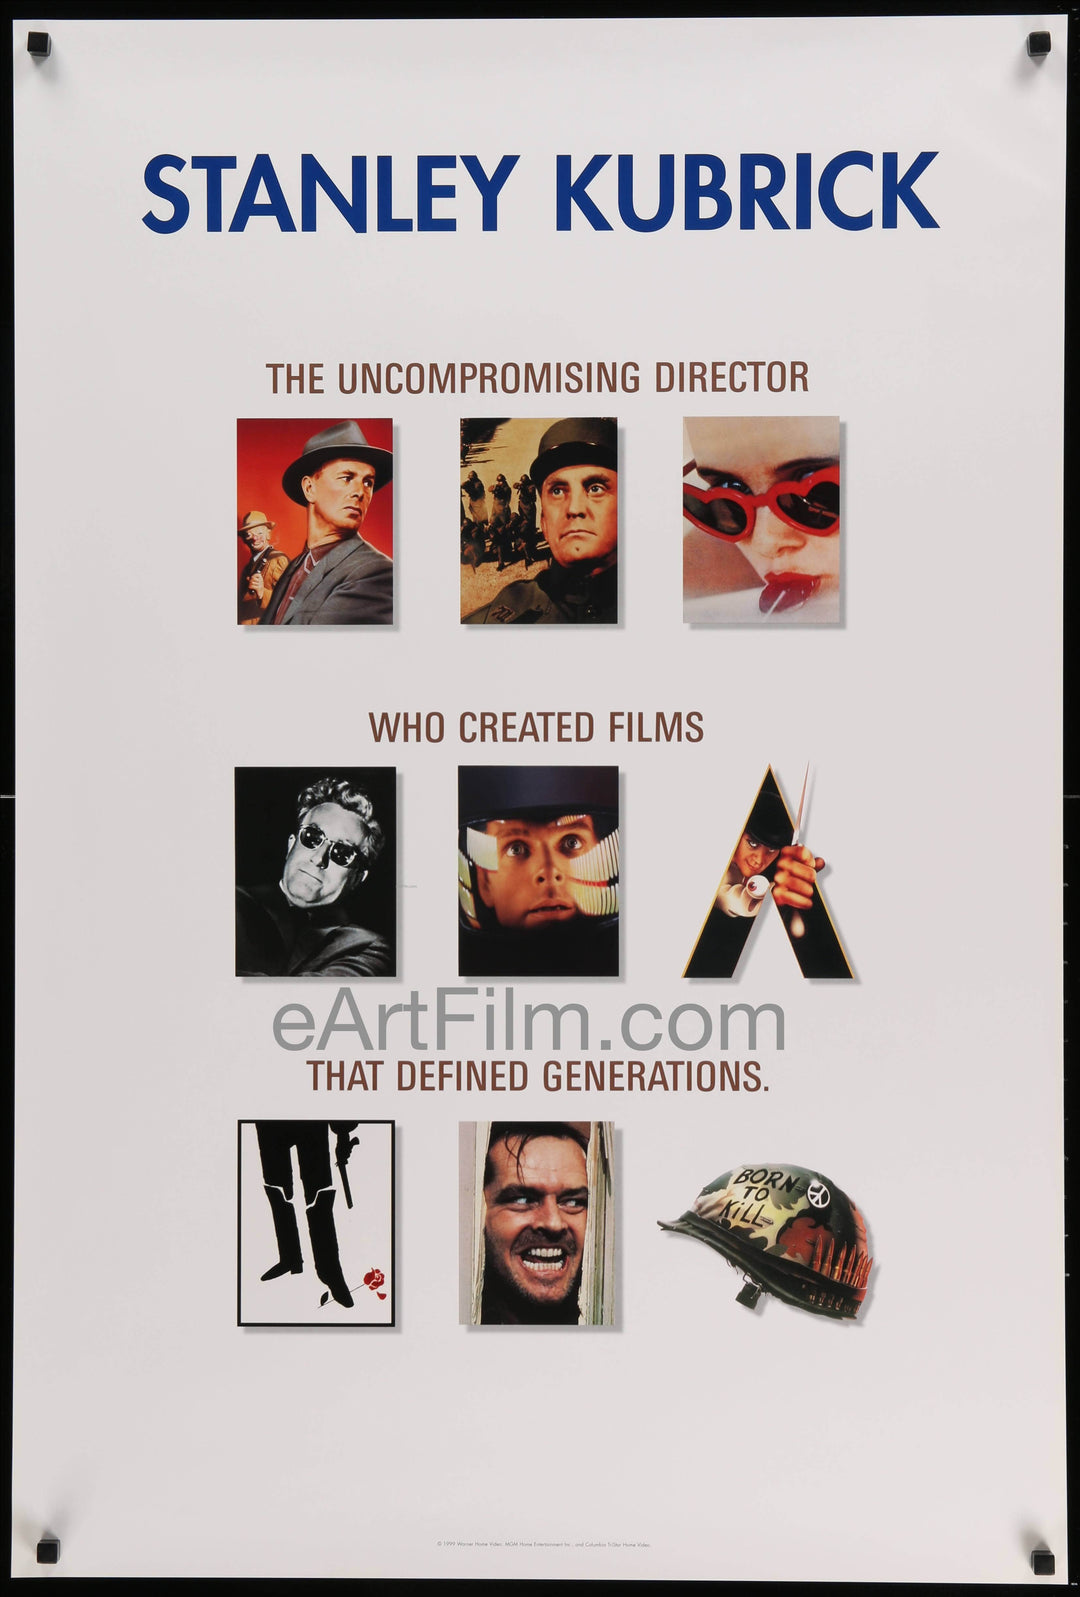 eArtFilm.com Video Poster (27"x40") Stanley Kubrick Collection-1999-27x40-Rare Video Poster-9 films!